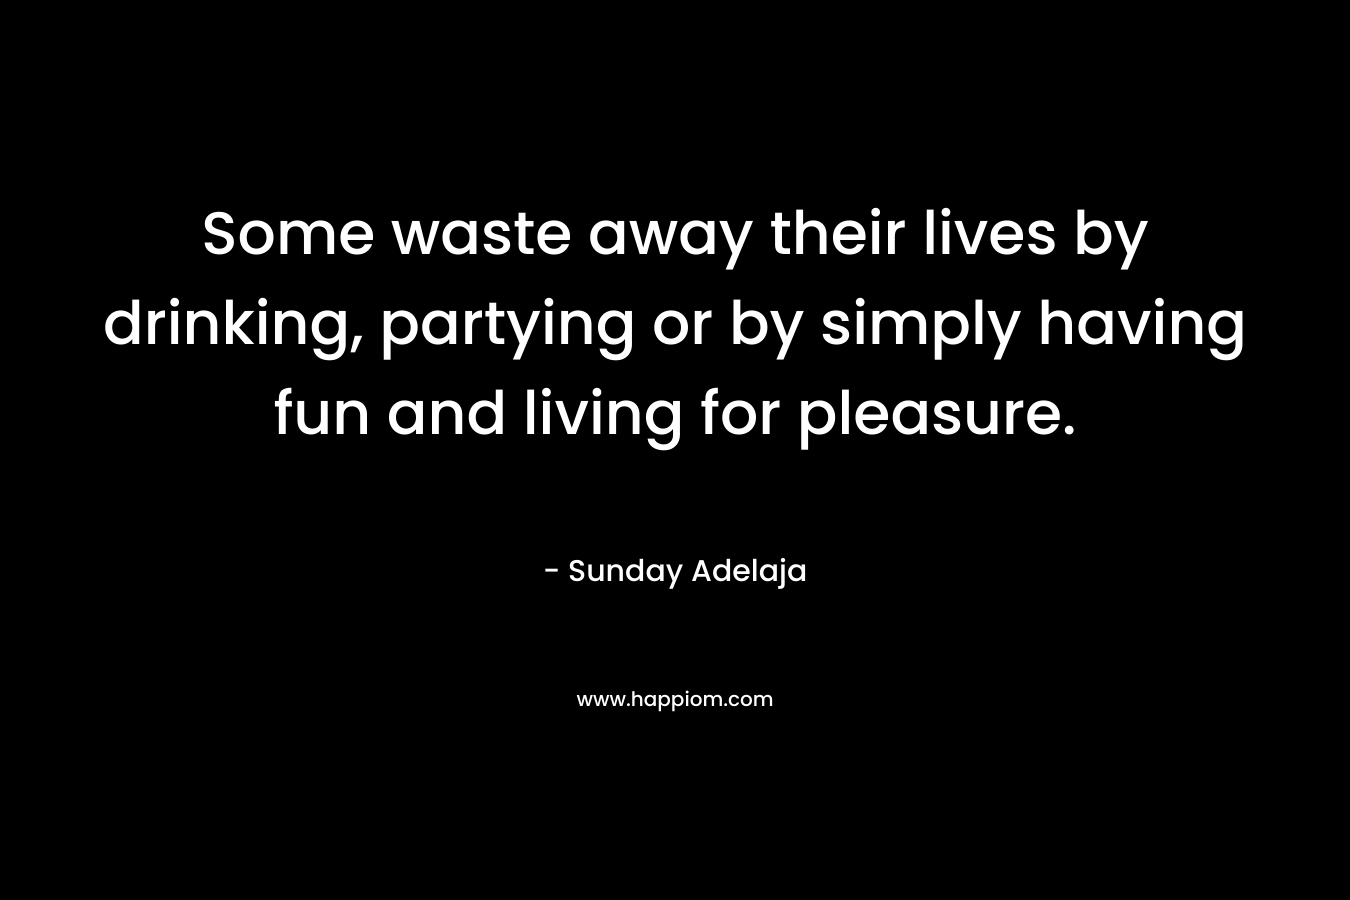 Some waste away their lives by drinking, partying or by simply having fun and living for pleasure.